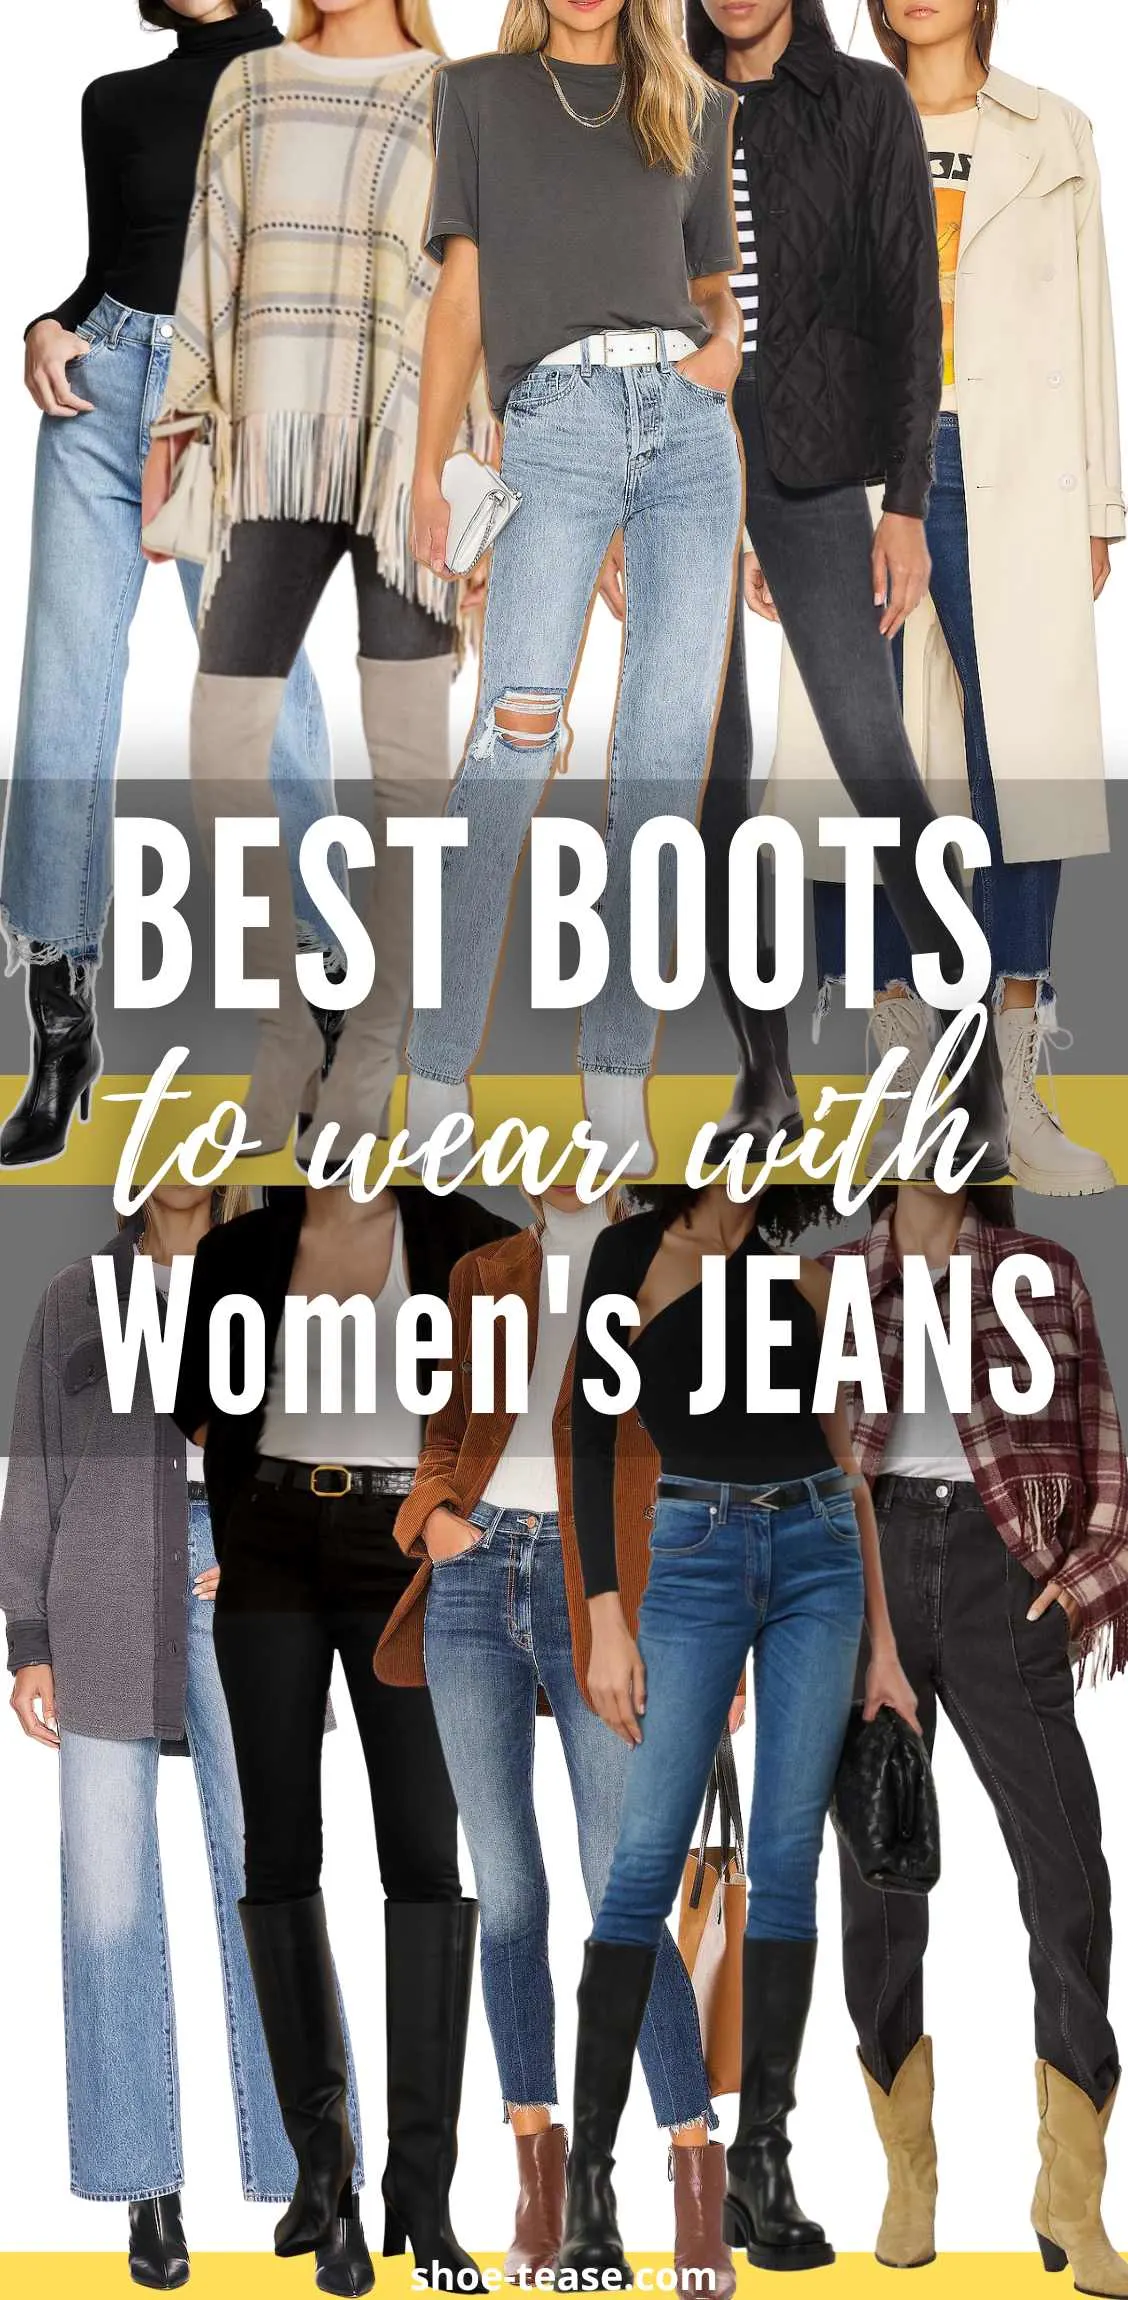 Collage of 10 women wearing different boots with jeans under text reading boots to wear with women's jeans.